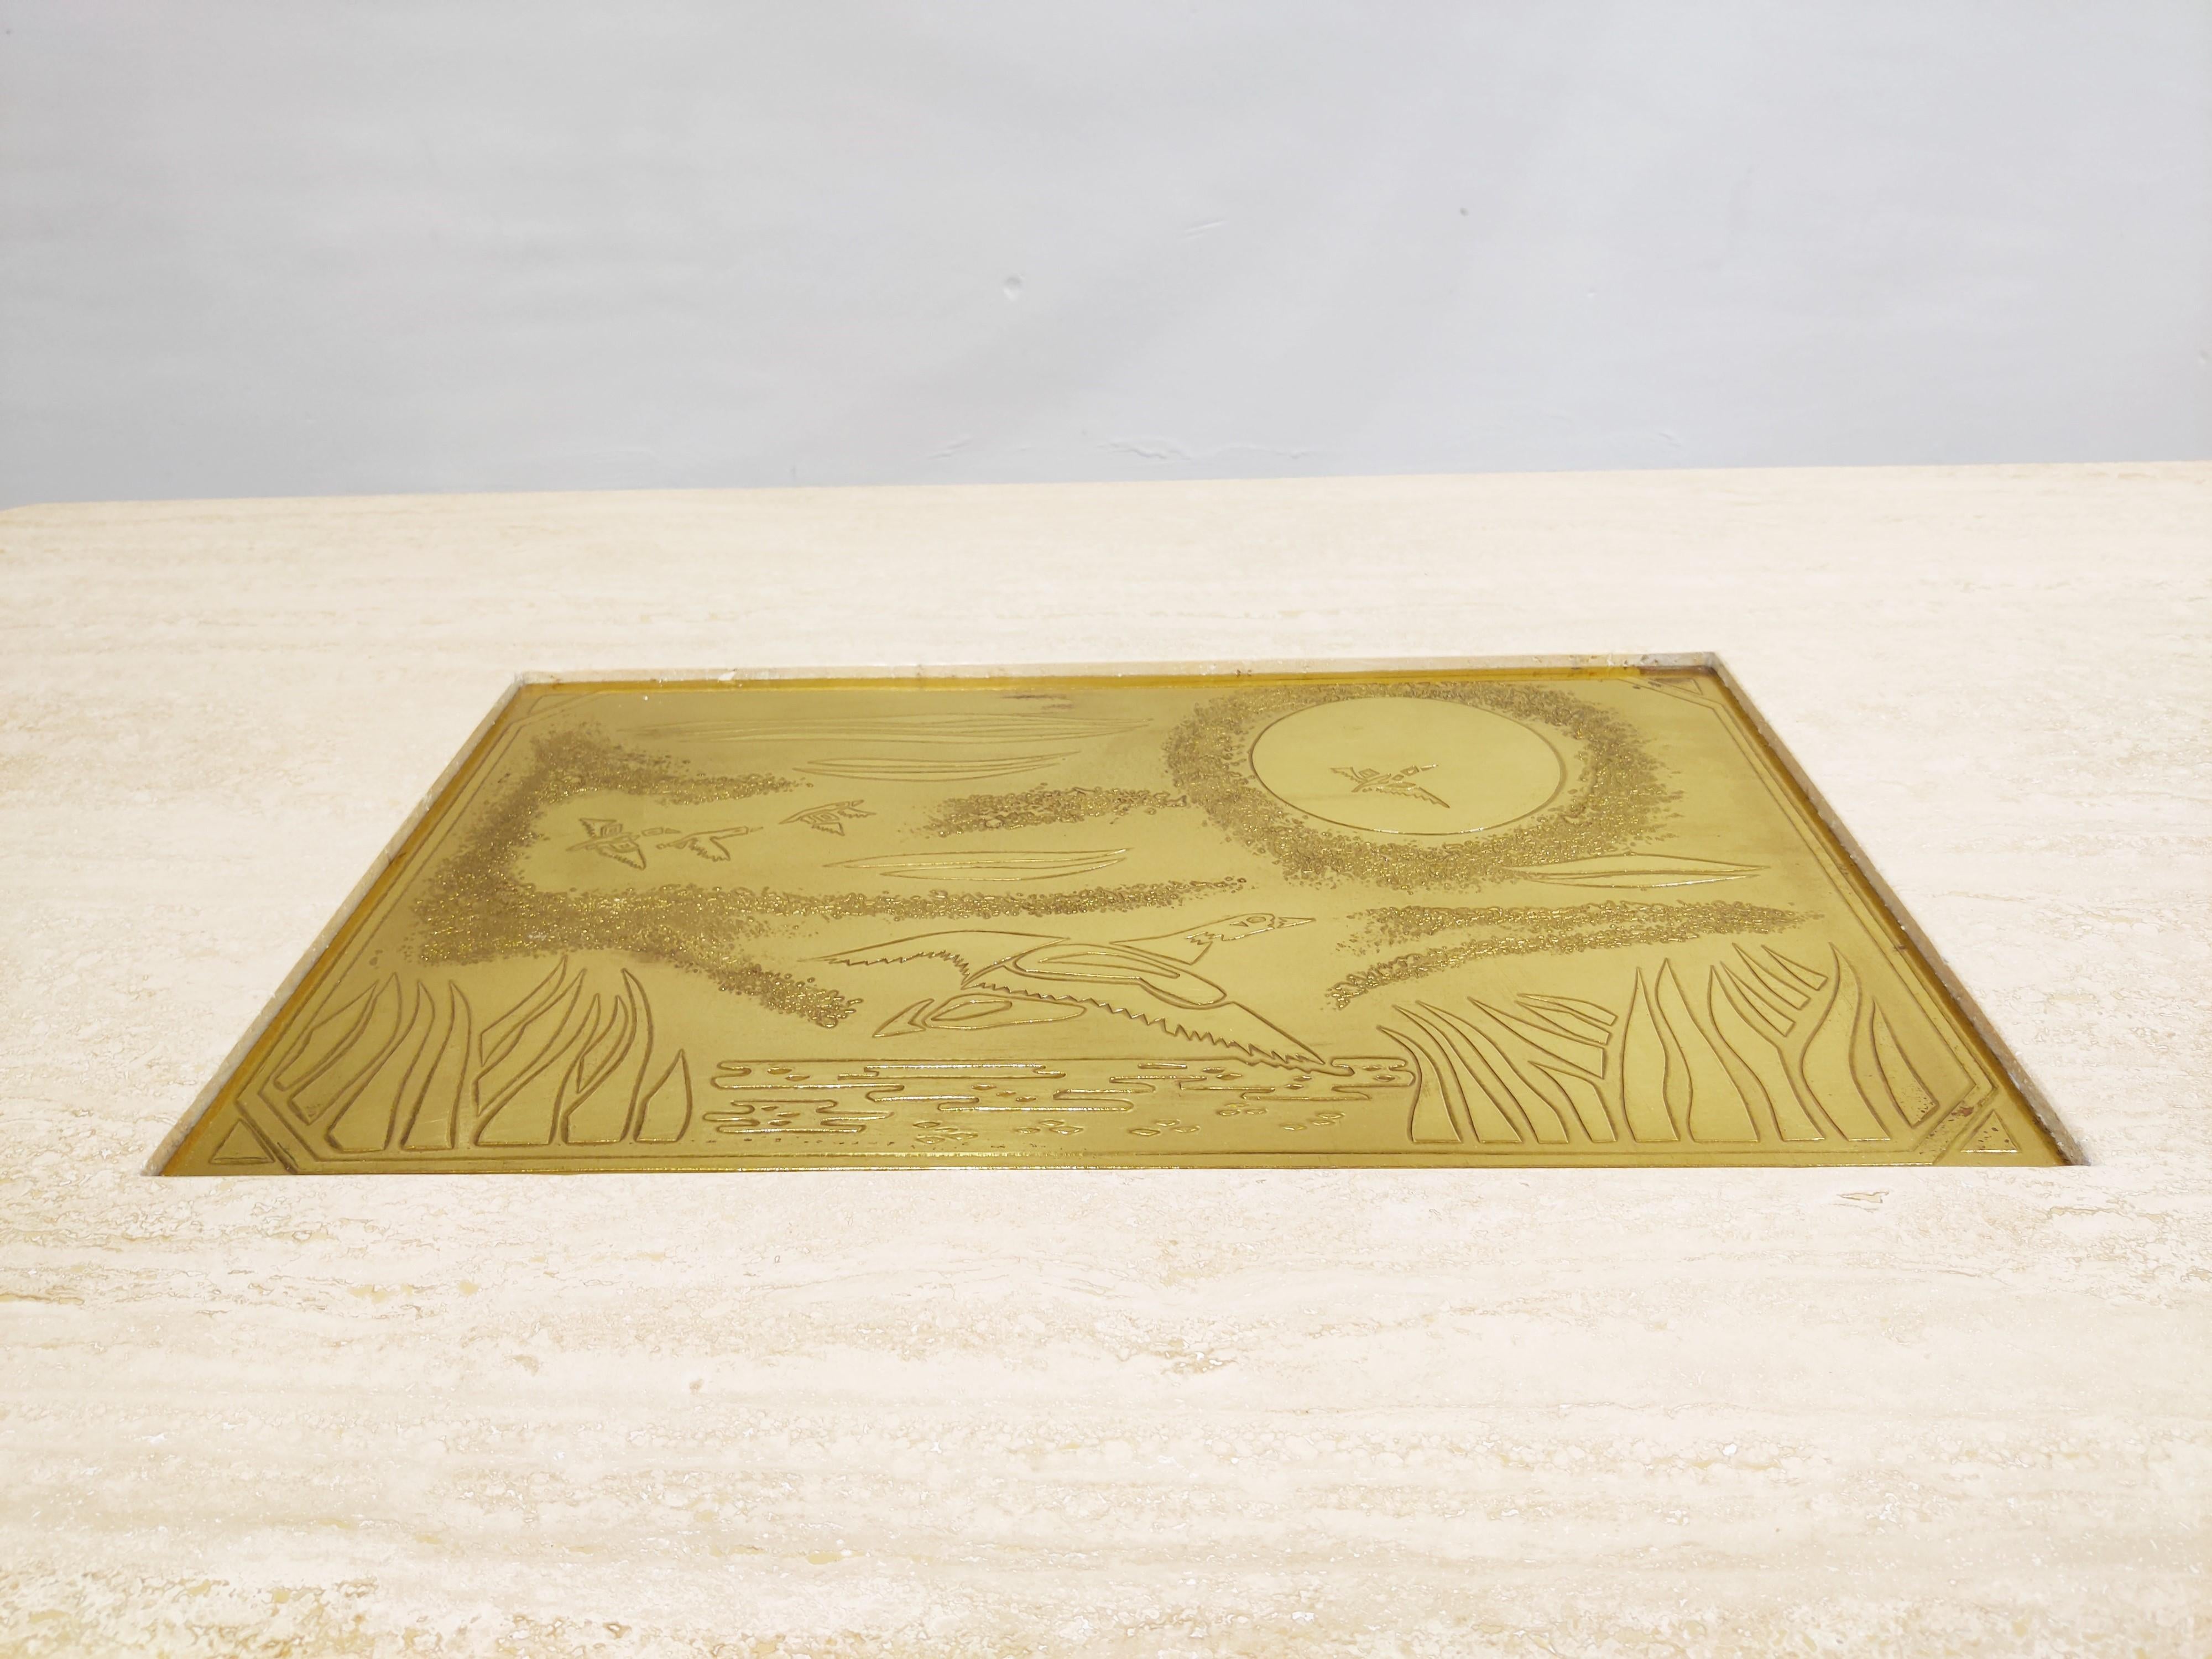 Travertine coffee table with a brass etched plate by Georges Mathias signed 'Maho'.

Number 35/50

The etched brass plate has a beautiful patinas and the travertine combines well with modern day interiors.

Good condition.

1970s -